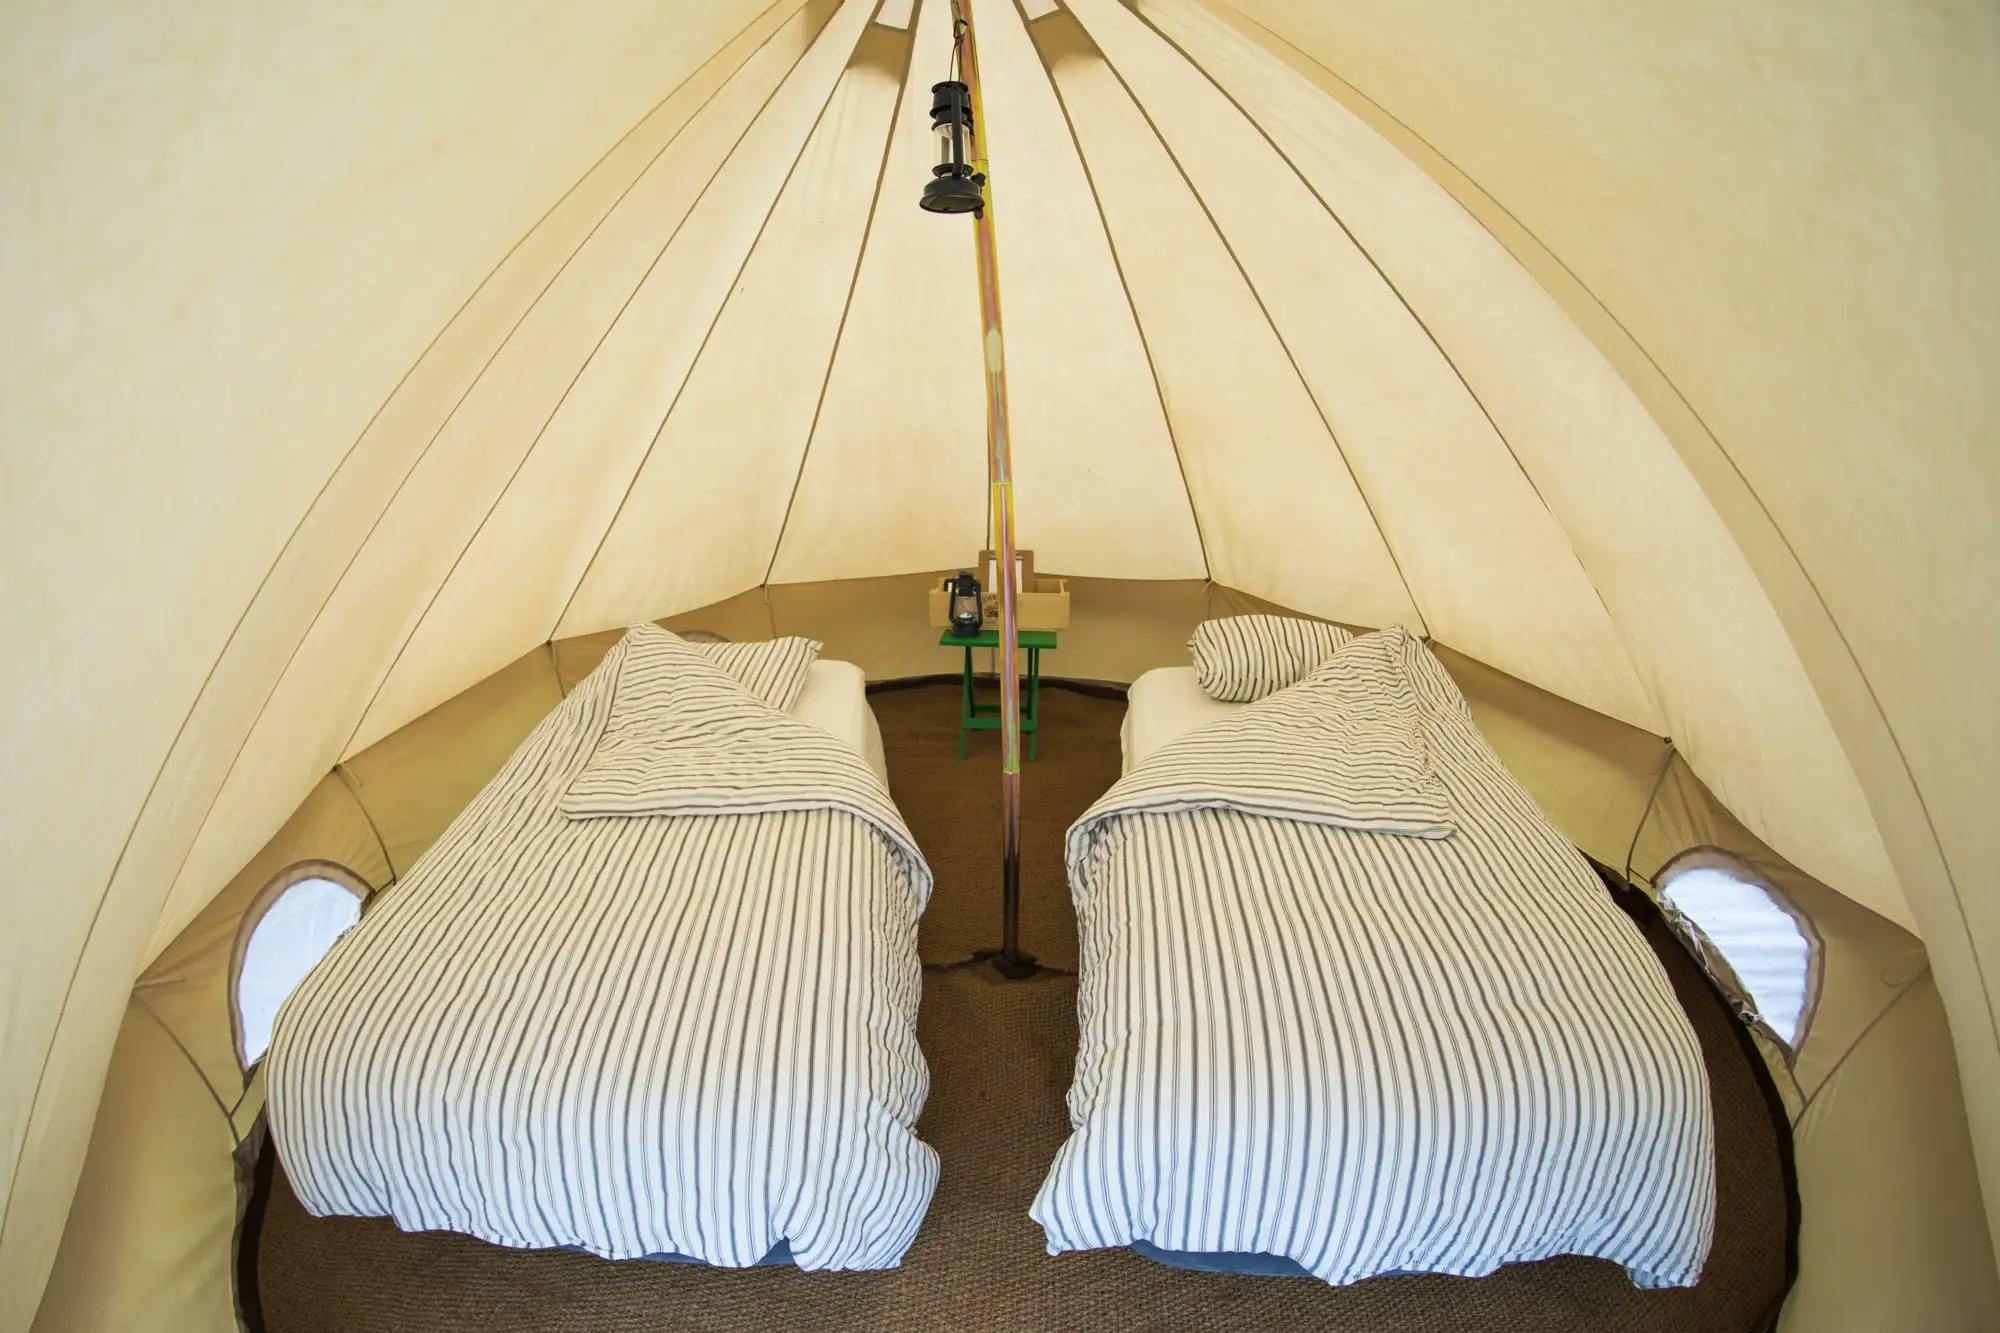 Interior of a tent with two beds and striped bedding.